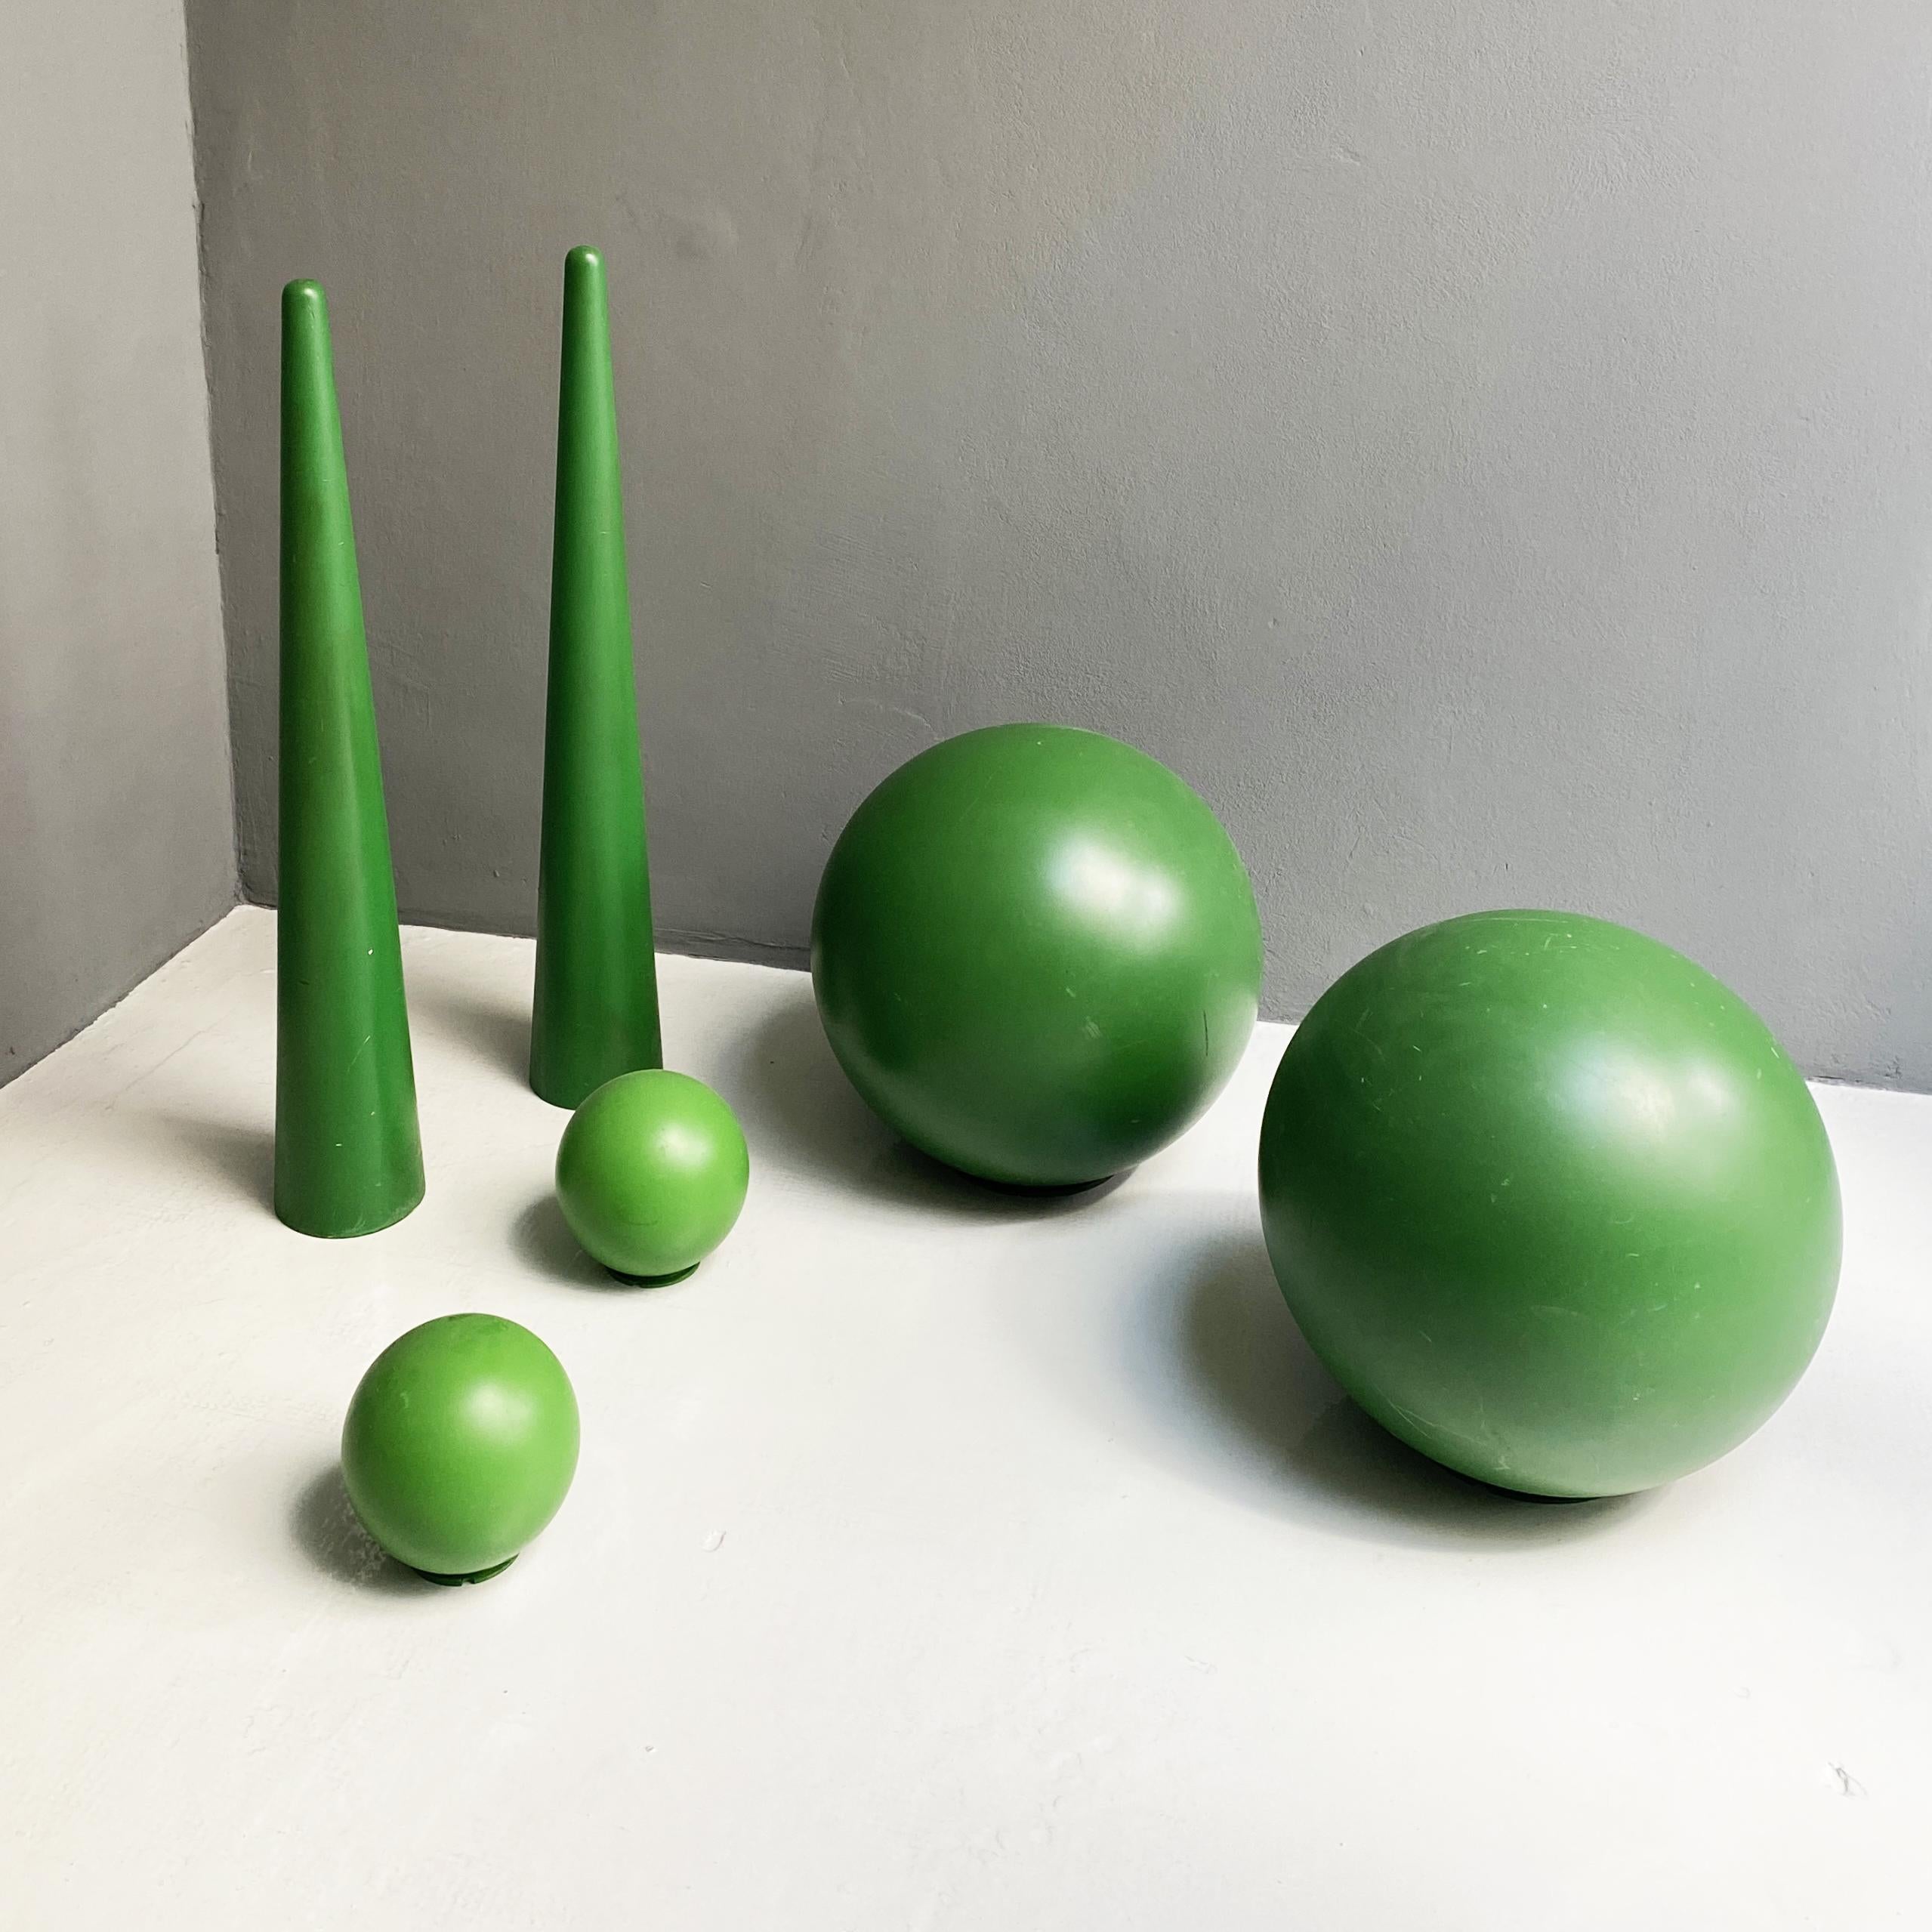 Italian Modern Green Plastic Props for Scenography, 1990s For Sale 6